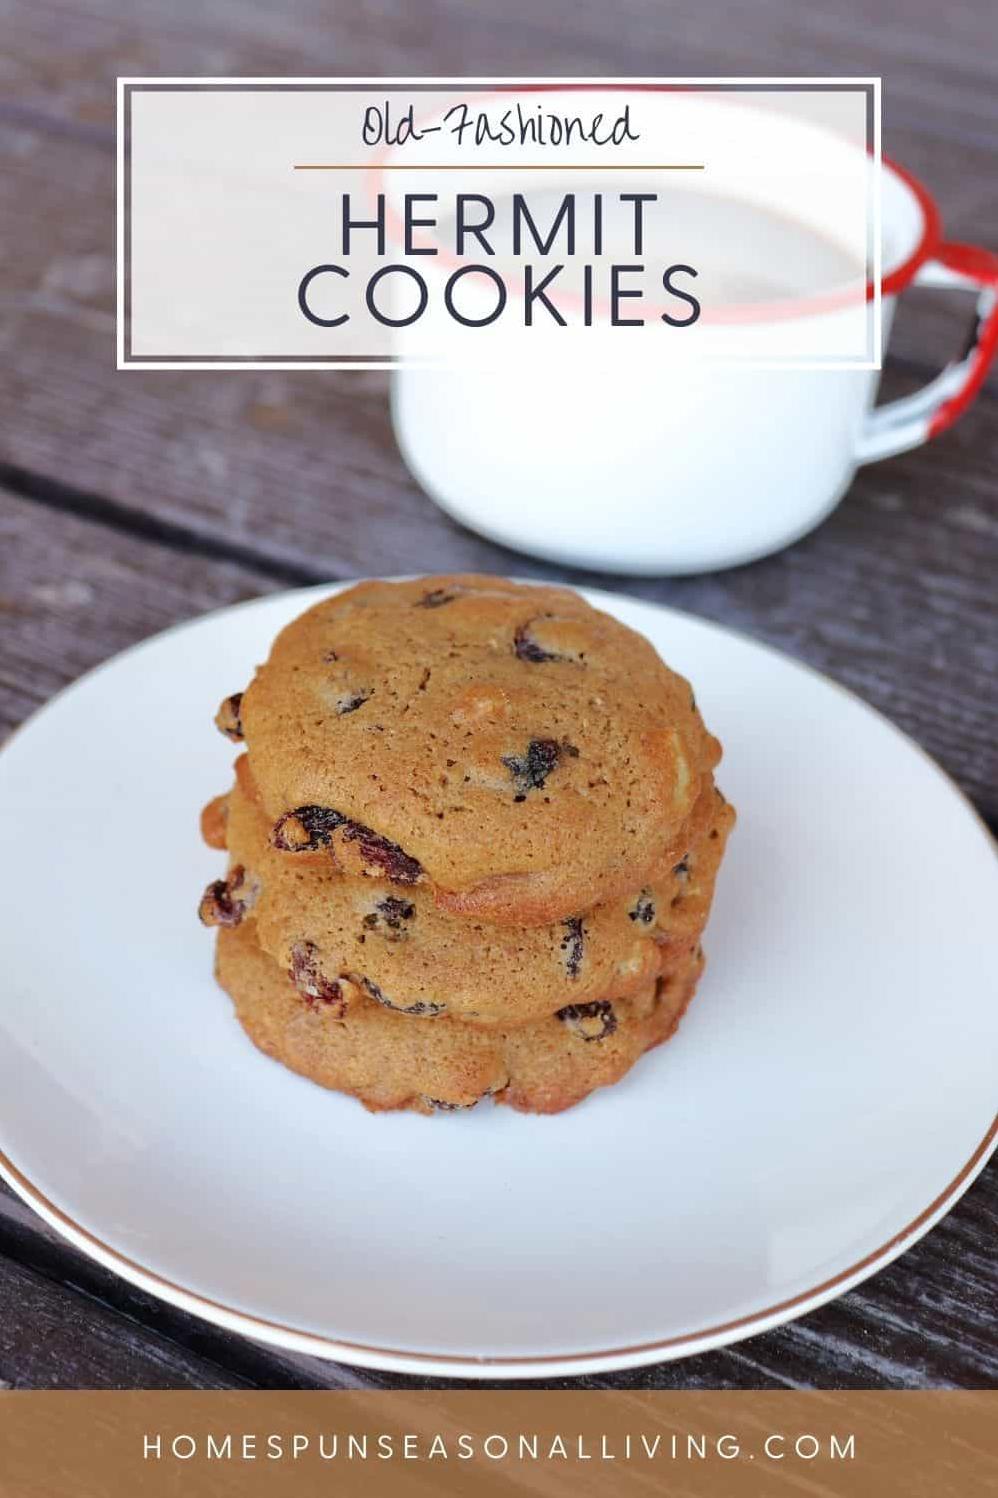  Go from zero to cookie hero with this Coffee Hermits recipe.